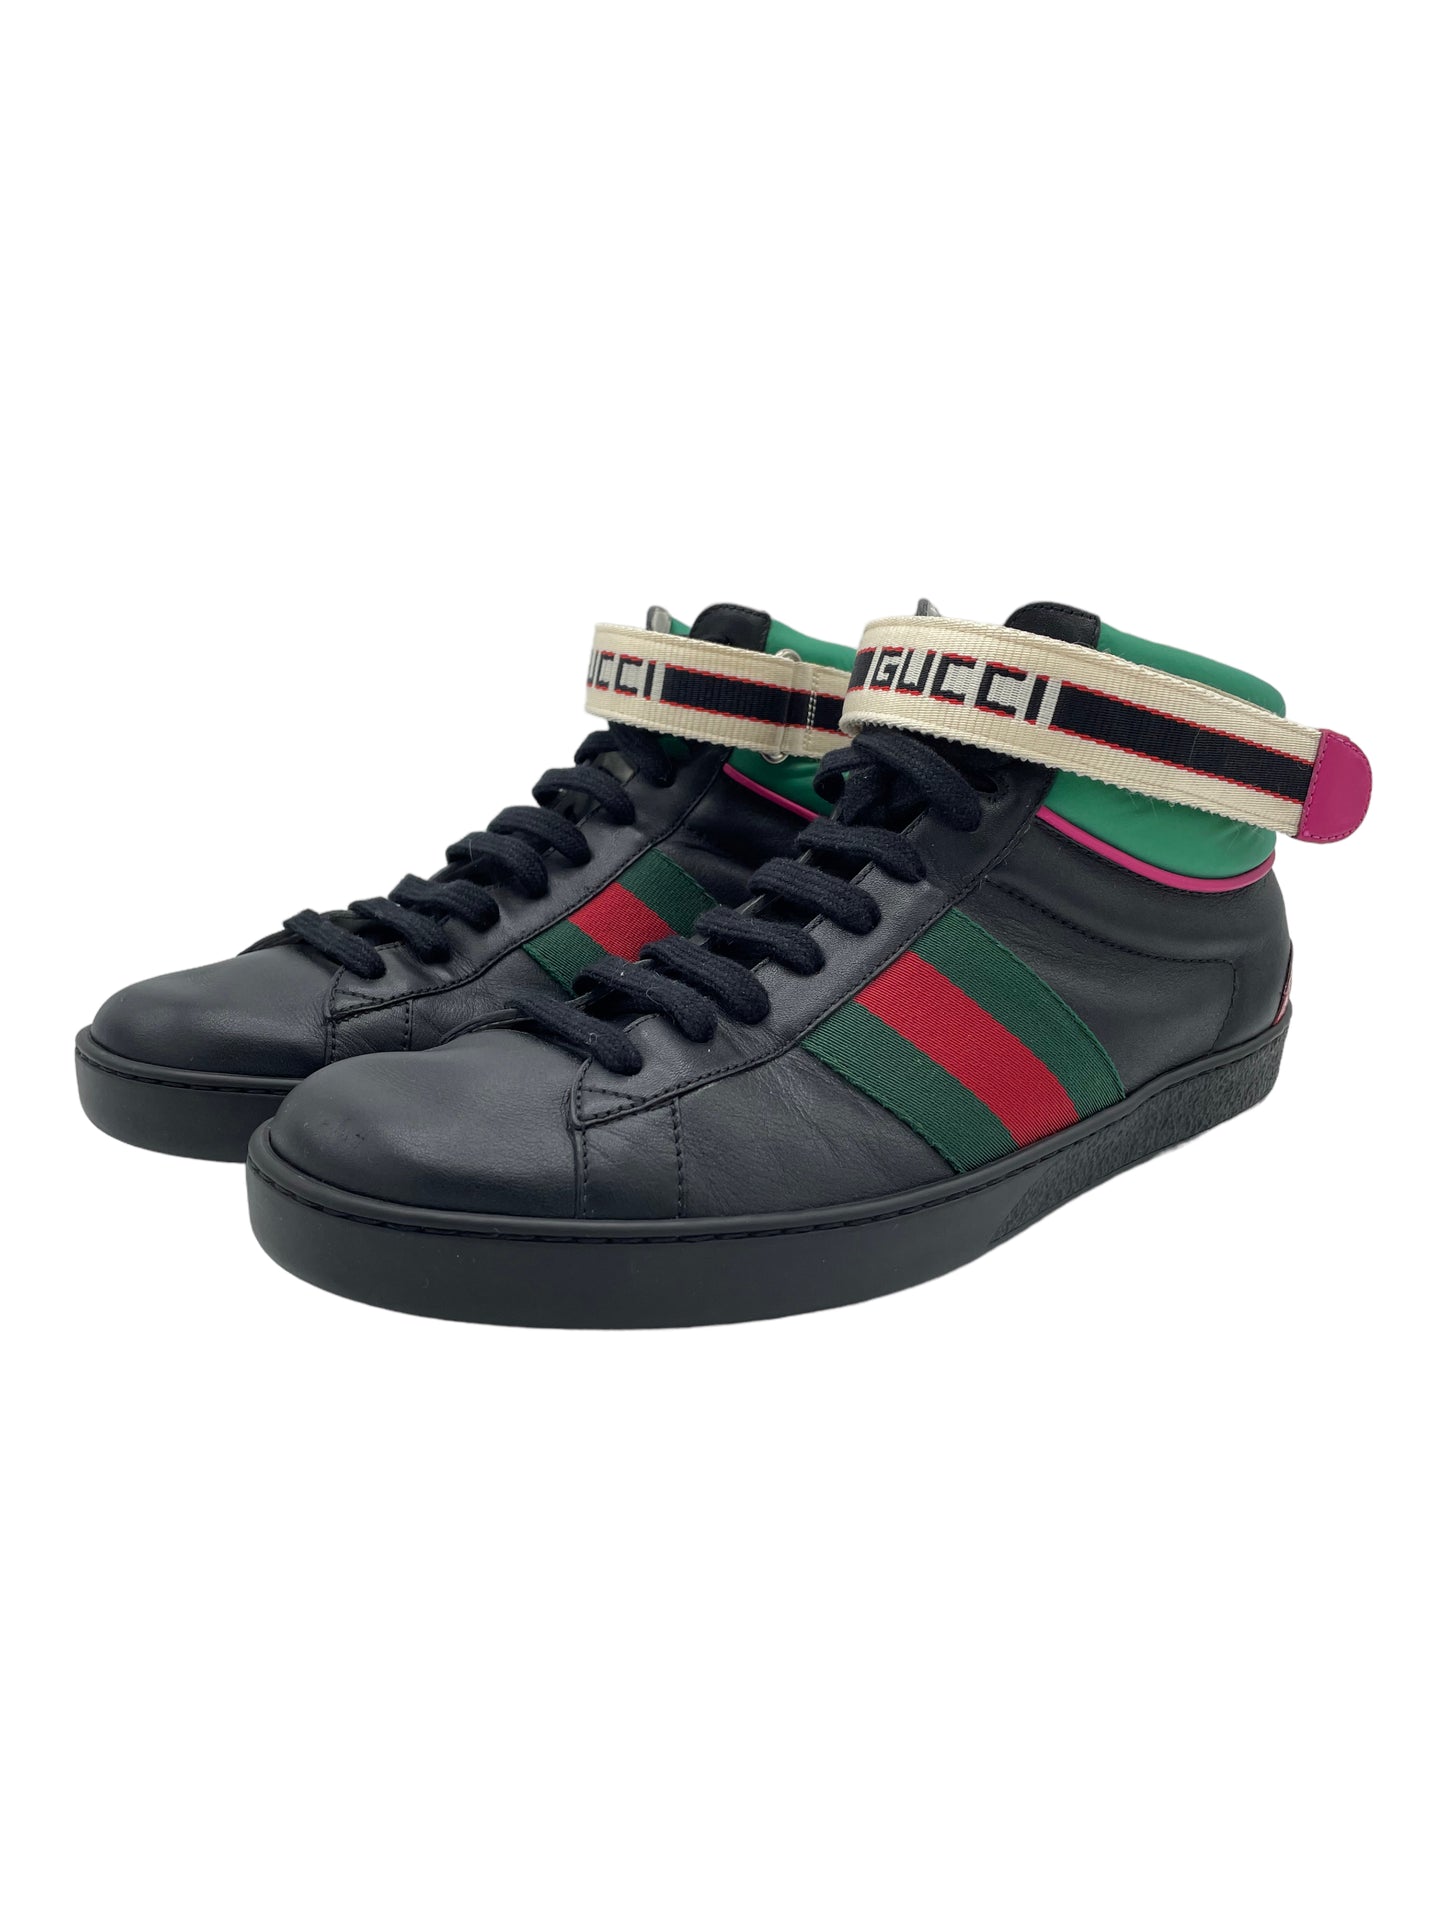 Gucci Black High Top Sneakers - Genuine Design Luxury Consignment for Men. New & Pre-Owned Clothing, Shoes, & Accessories. Calgary, Canada